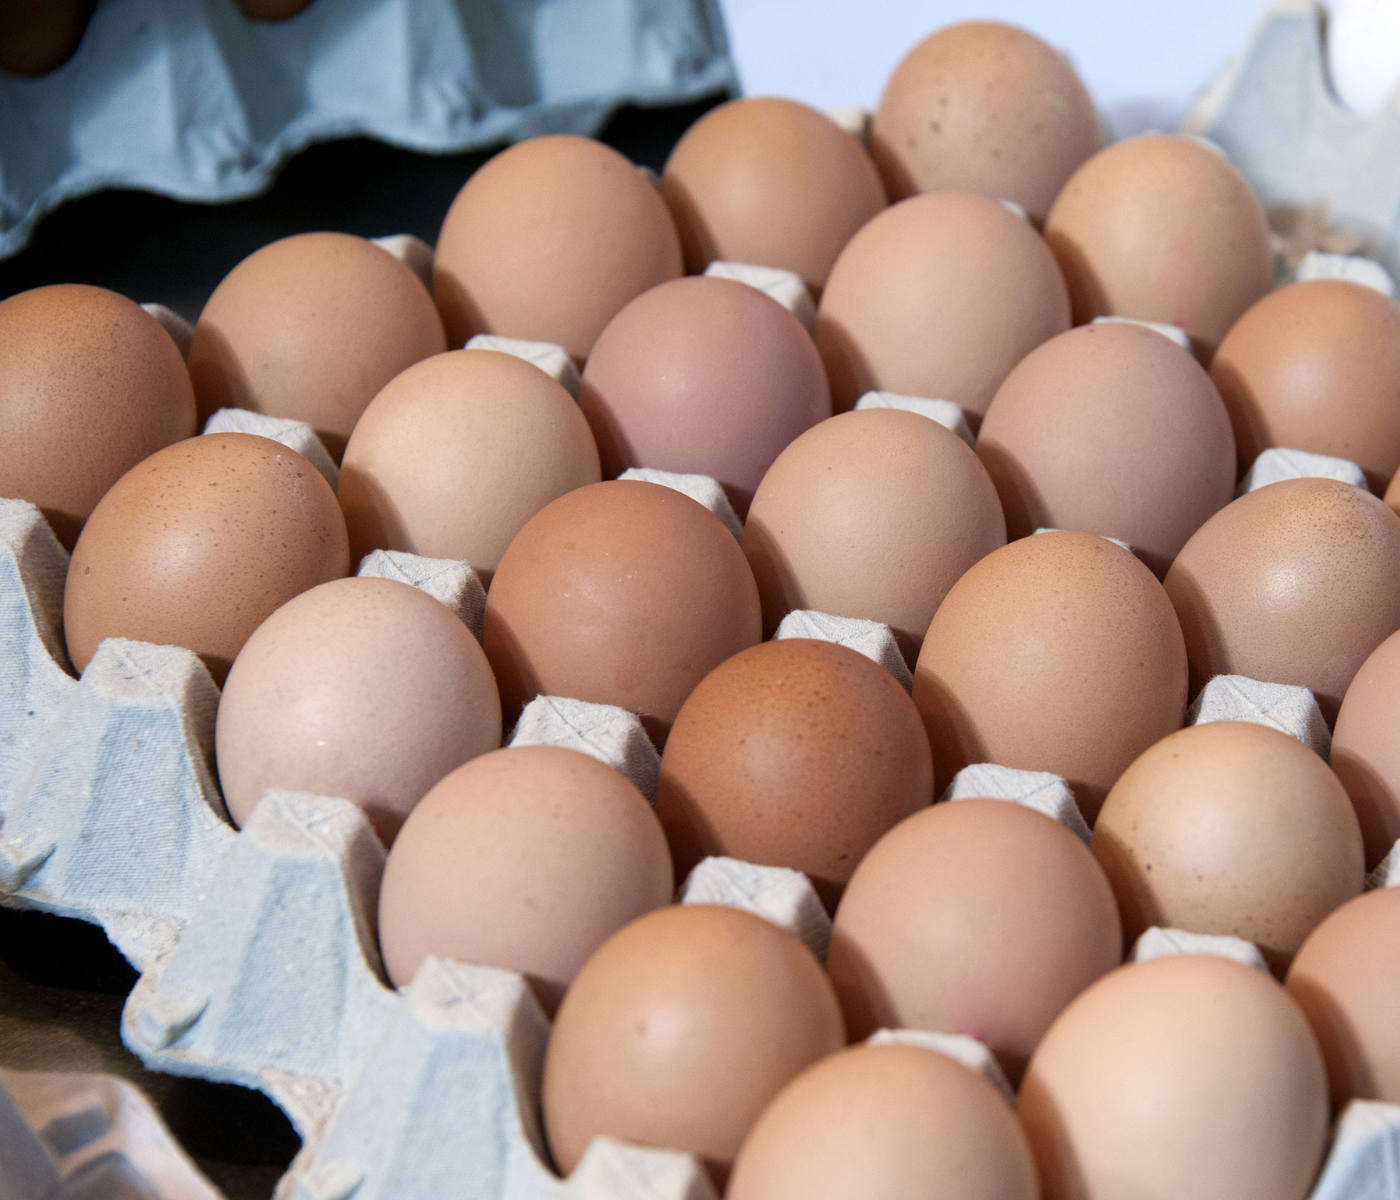 Dominican Republic: Egg prices are cheaper than in other countries